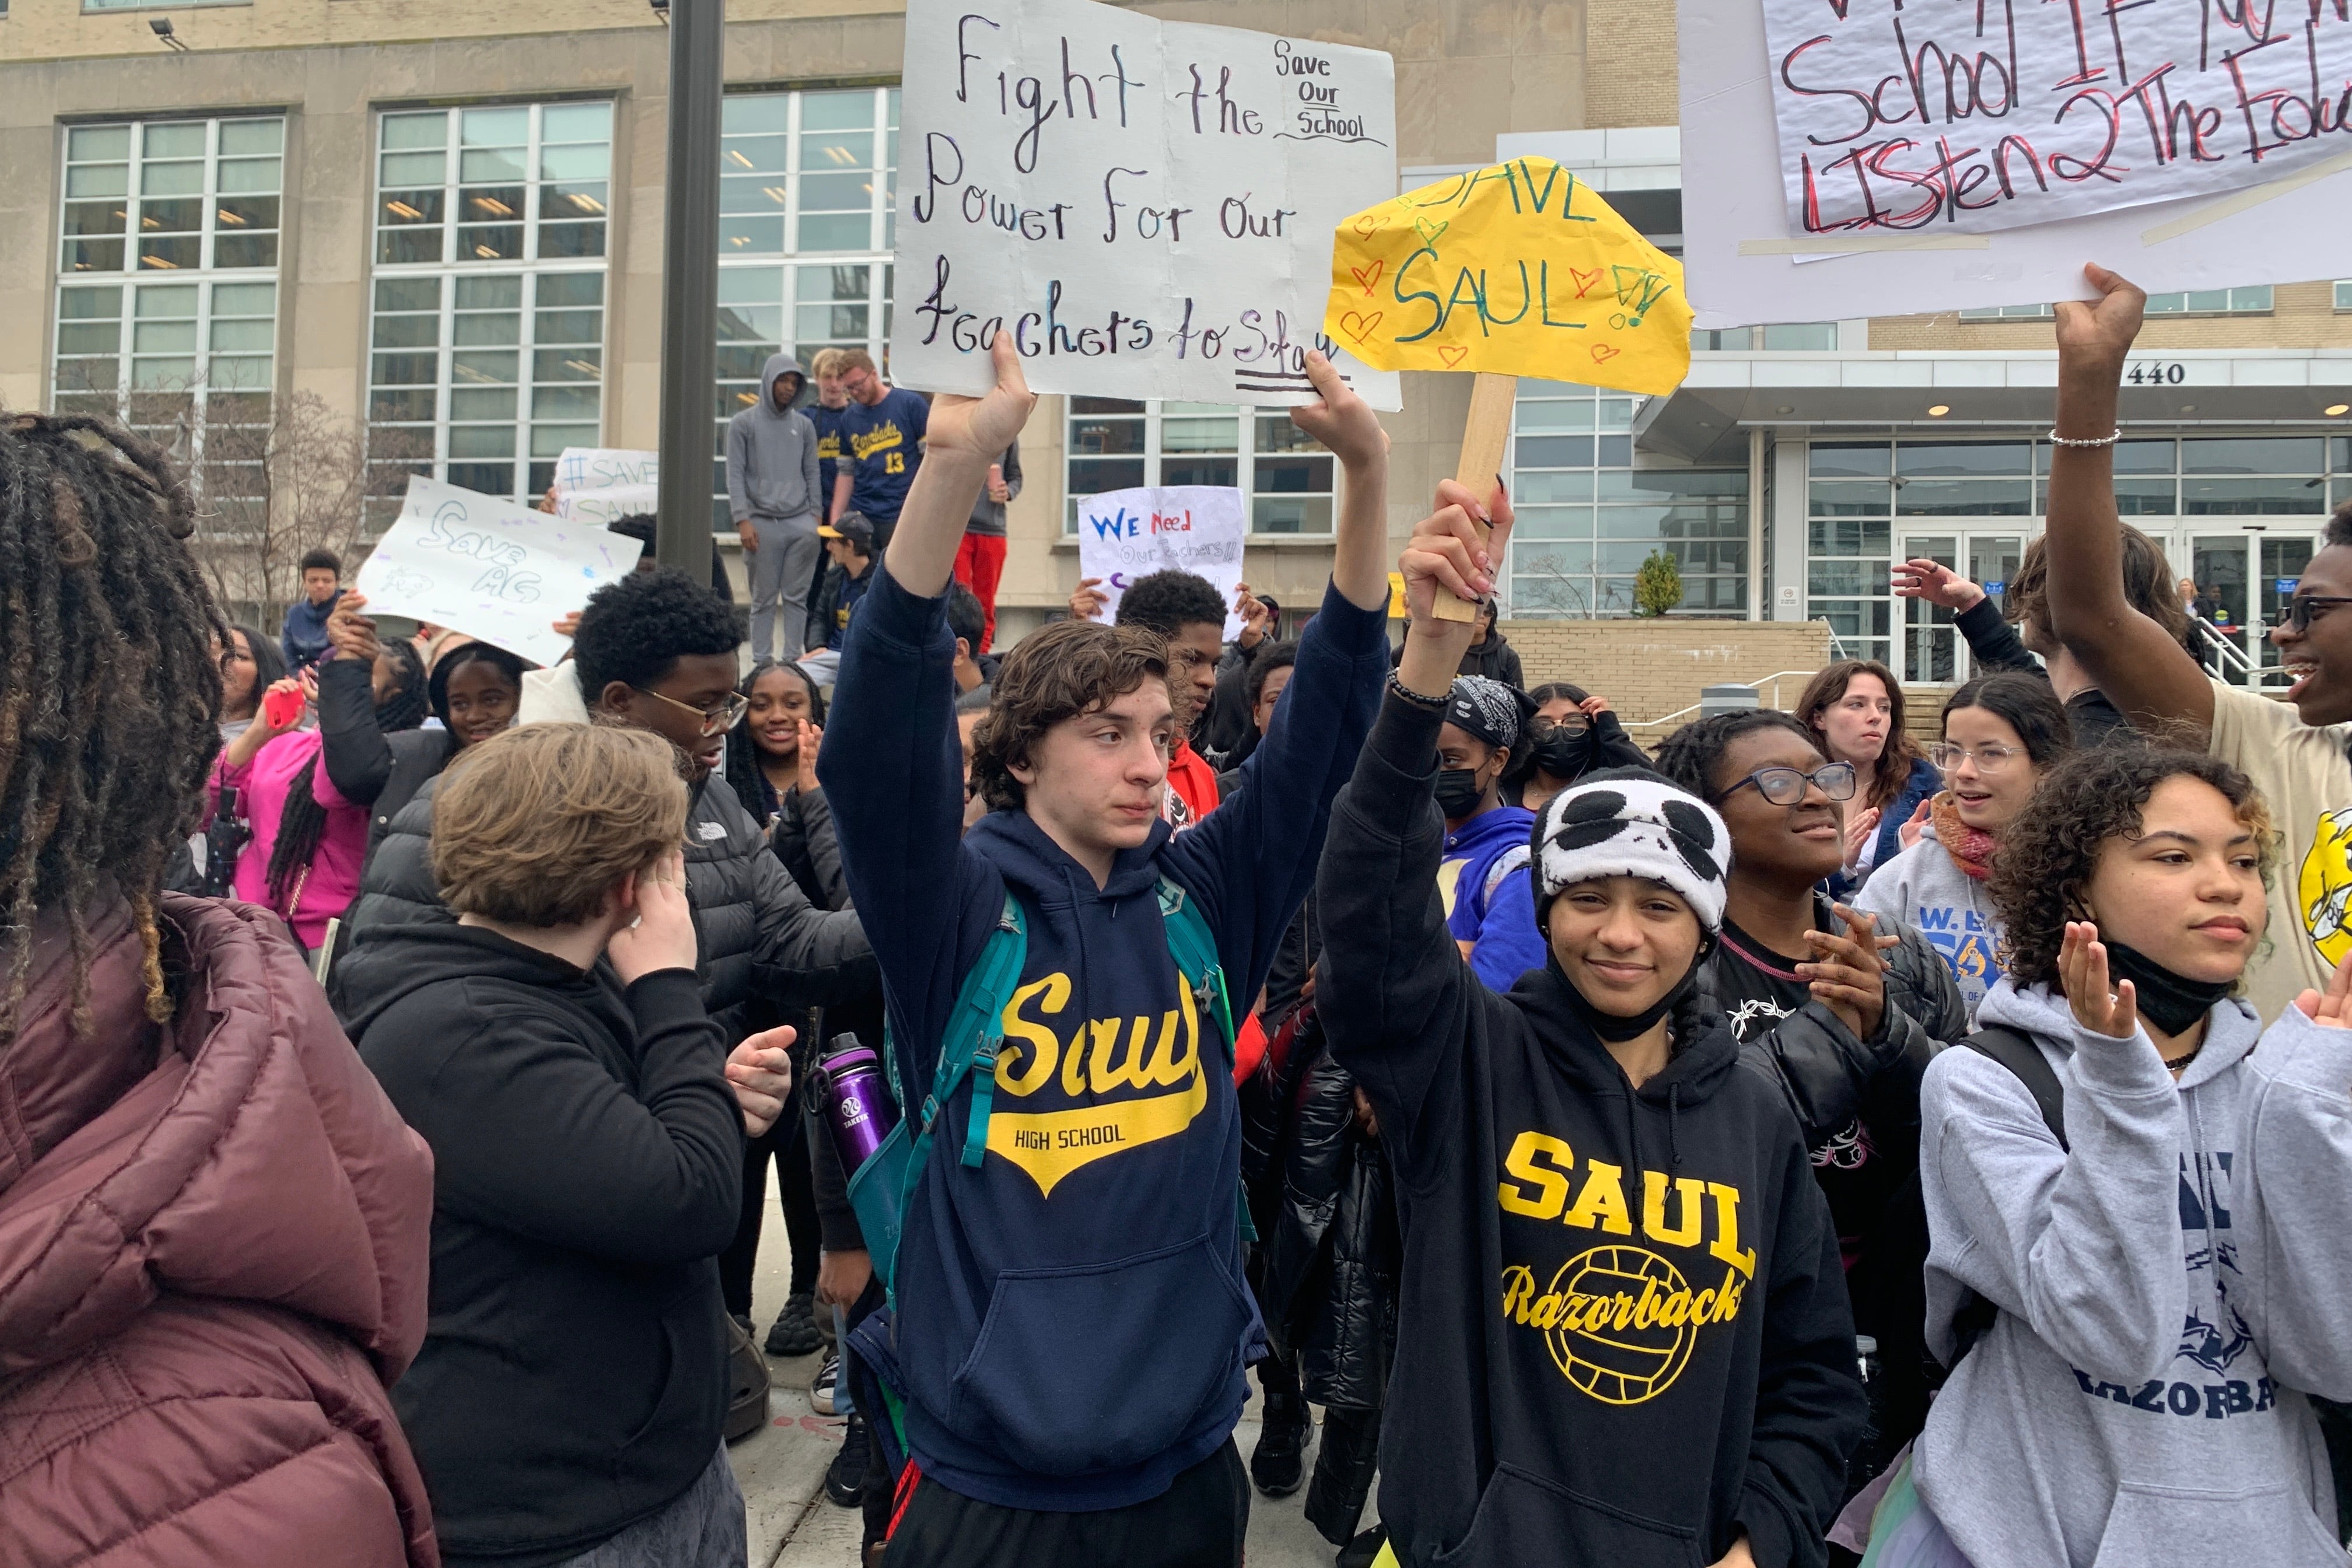 Students hold up signs in front of a brick building